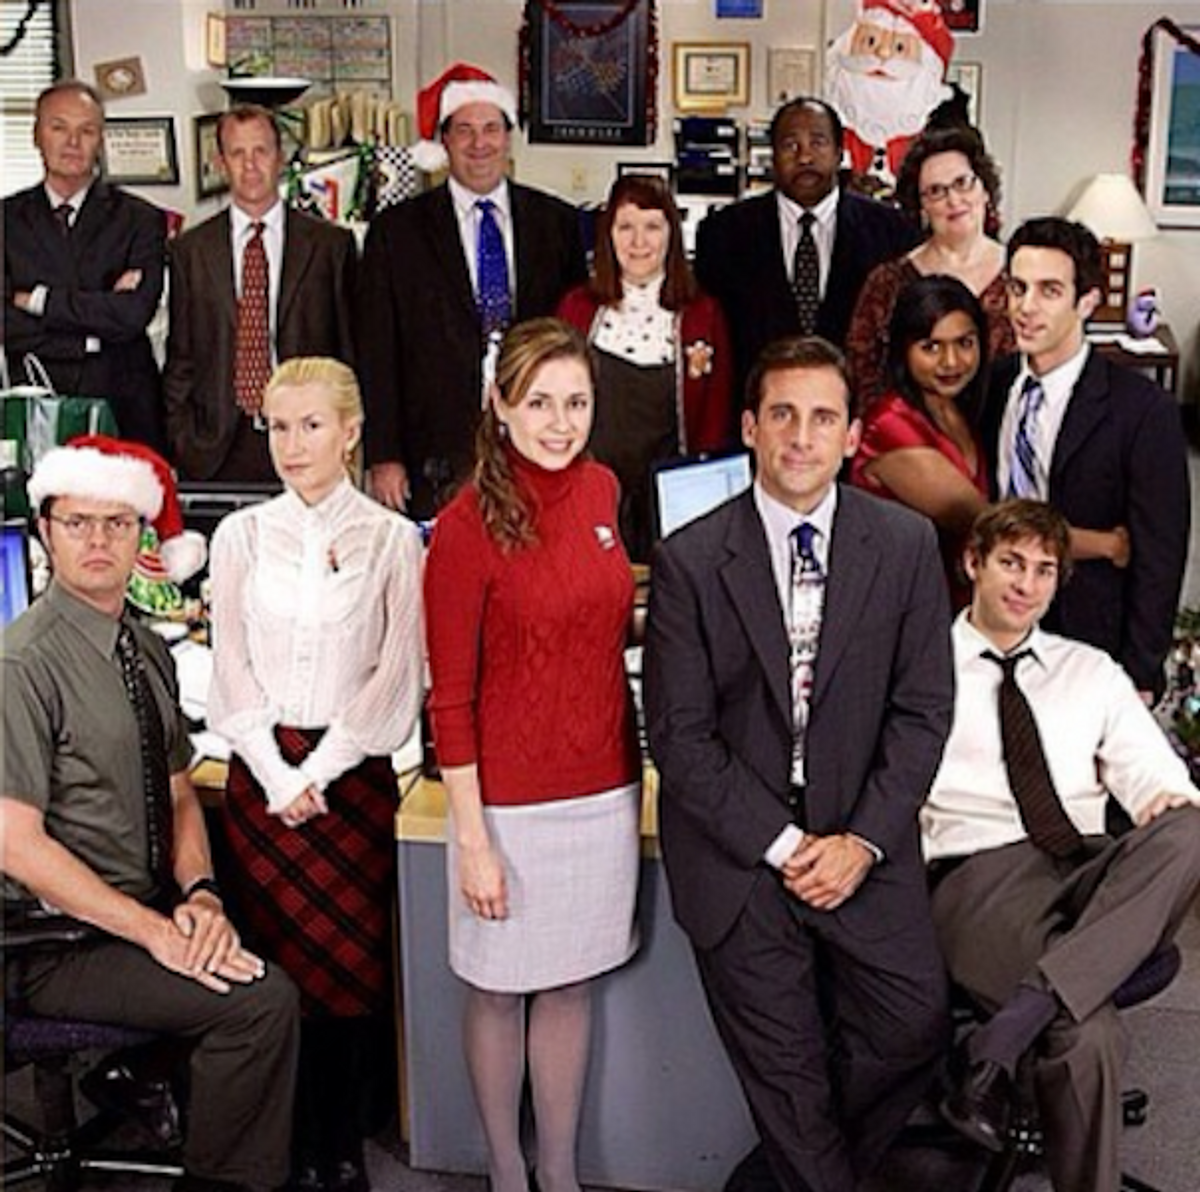 Your Family At Christmas As Told By "The Office"